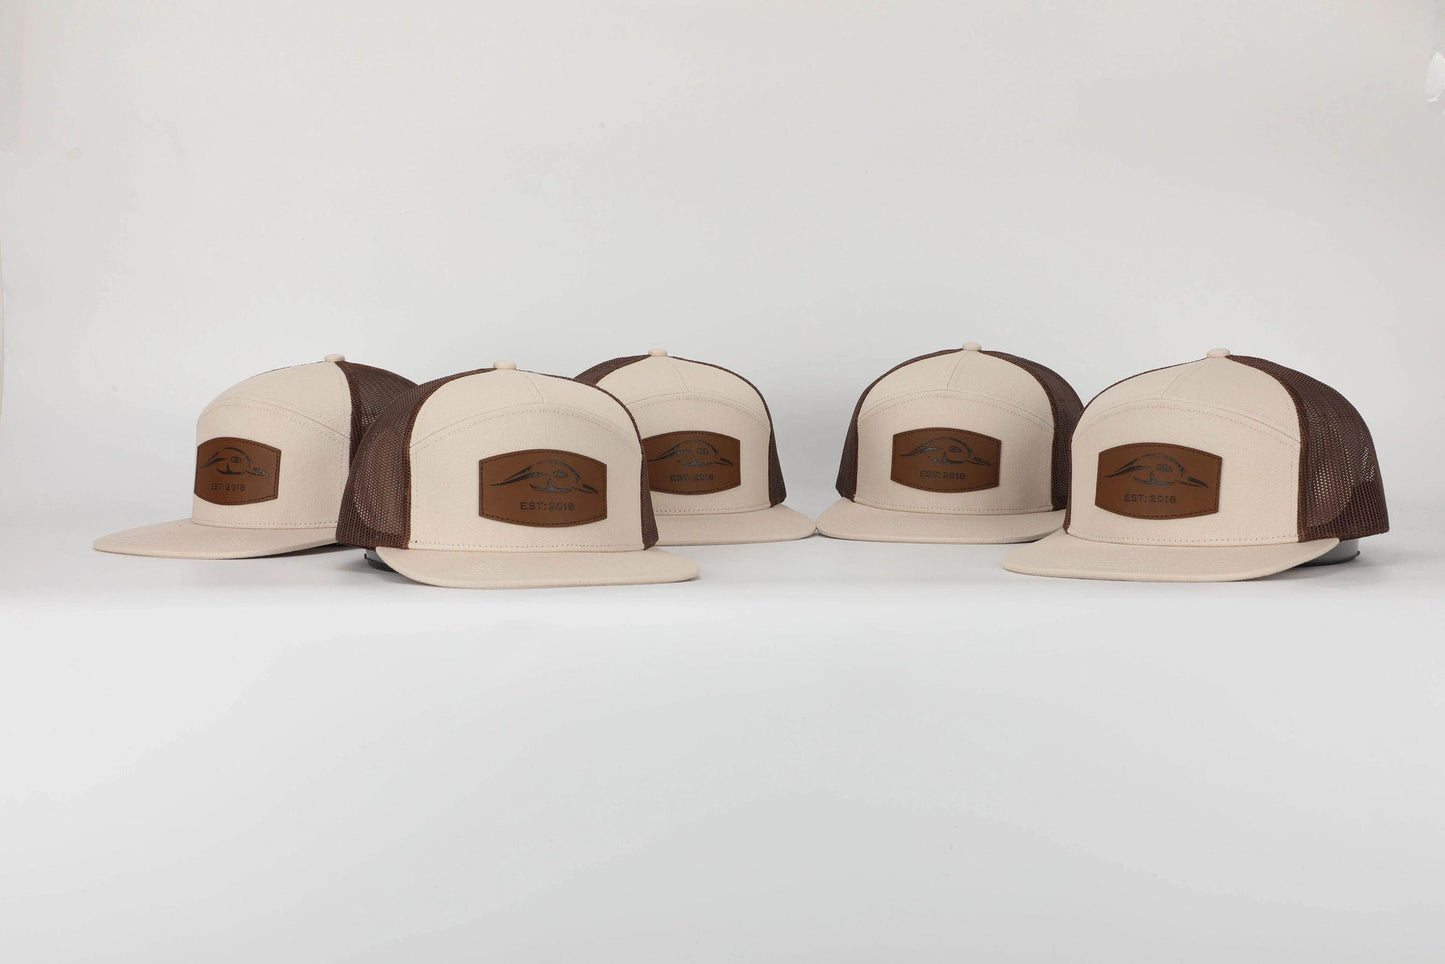 AF Waterfowl Leather Patch Pale Khaki & Brown 7 Panel Trucker